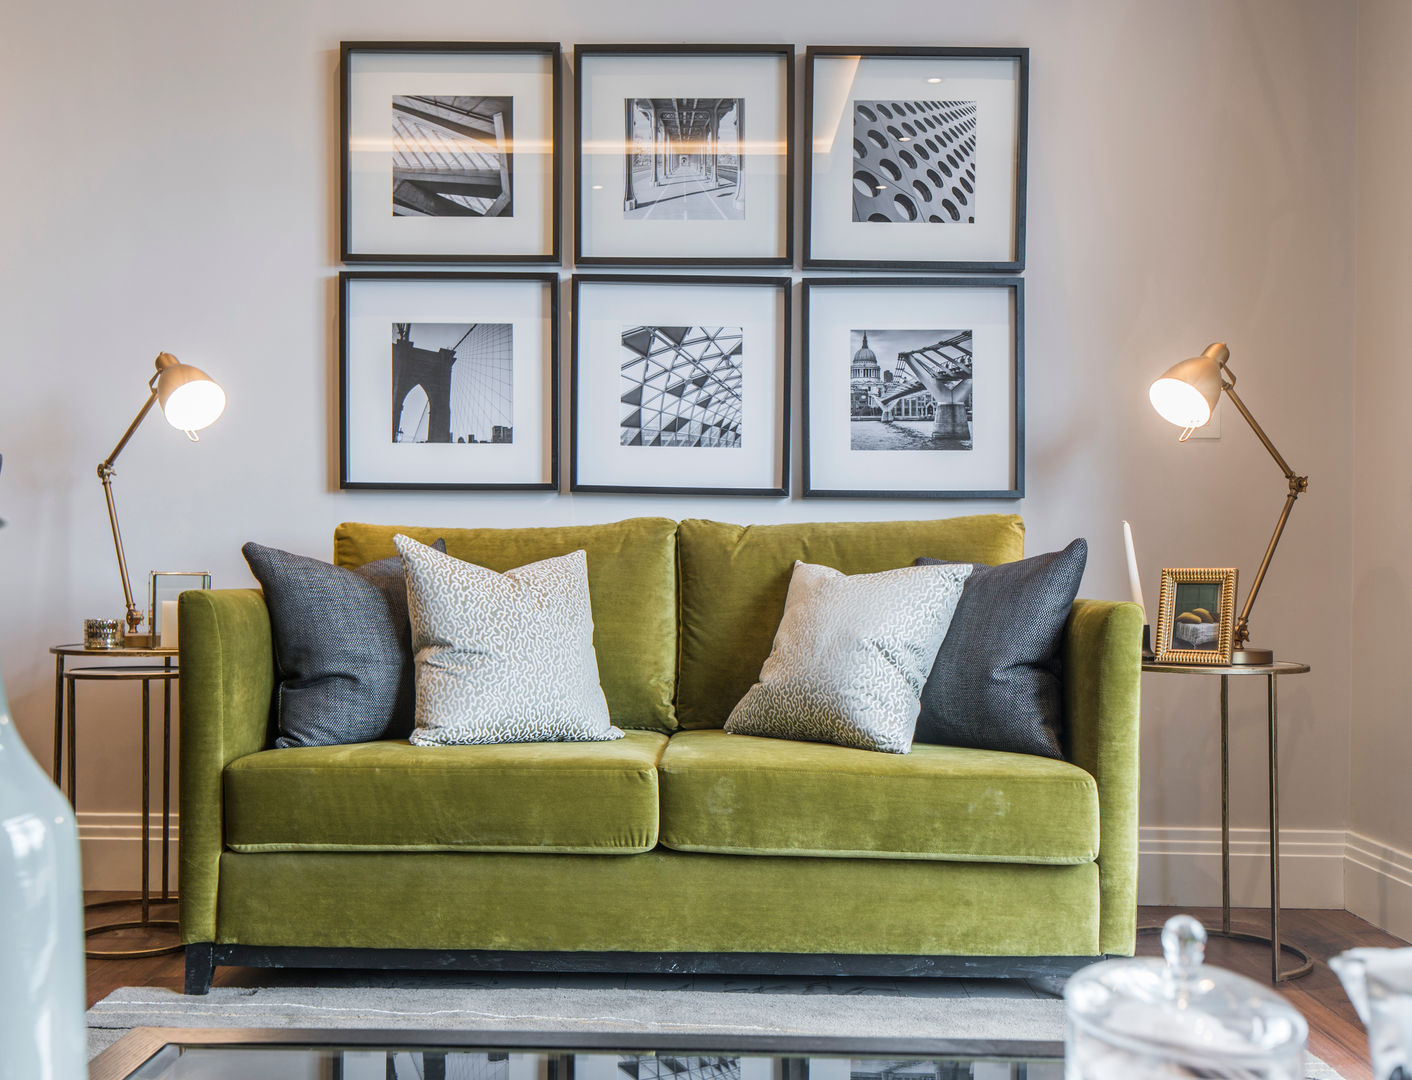 Musewll Hill, London Jigsaw Interior Architecture & Design オリジナルデザインの リビング 銅/ブロンズ/真鍮 green sofa,velvet,luxury,picture wall,gallery,textiles,living room,jigsaw interiors,copper,brass